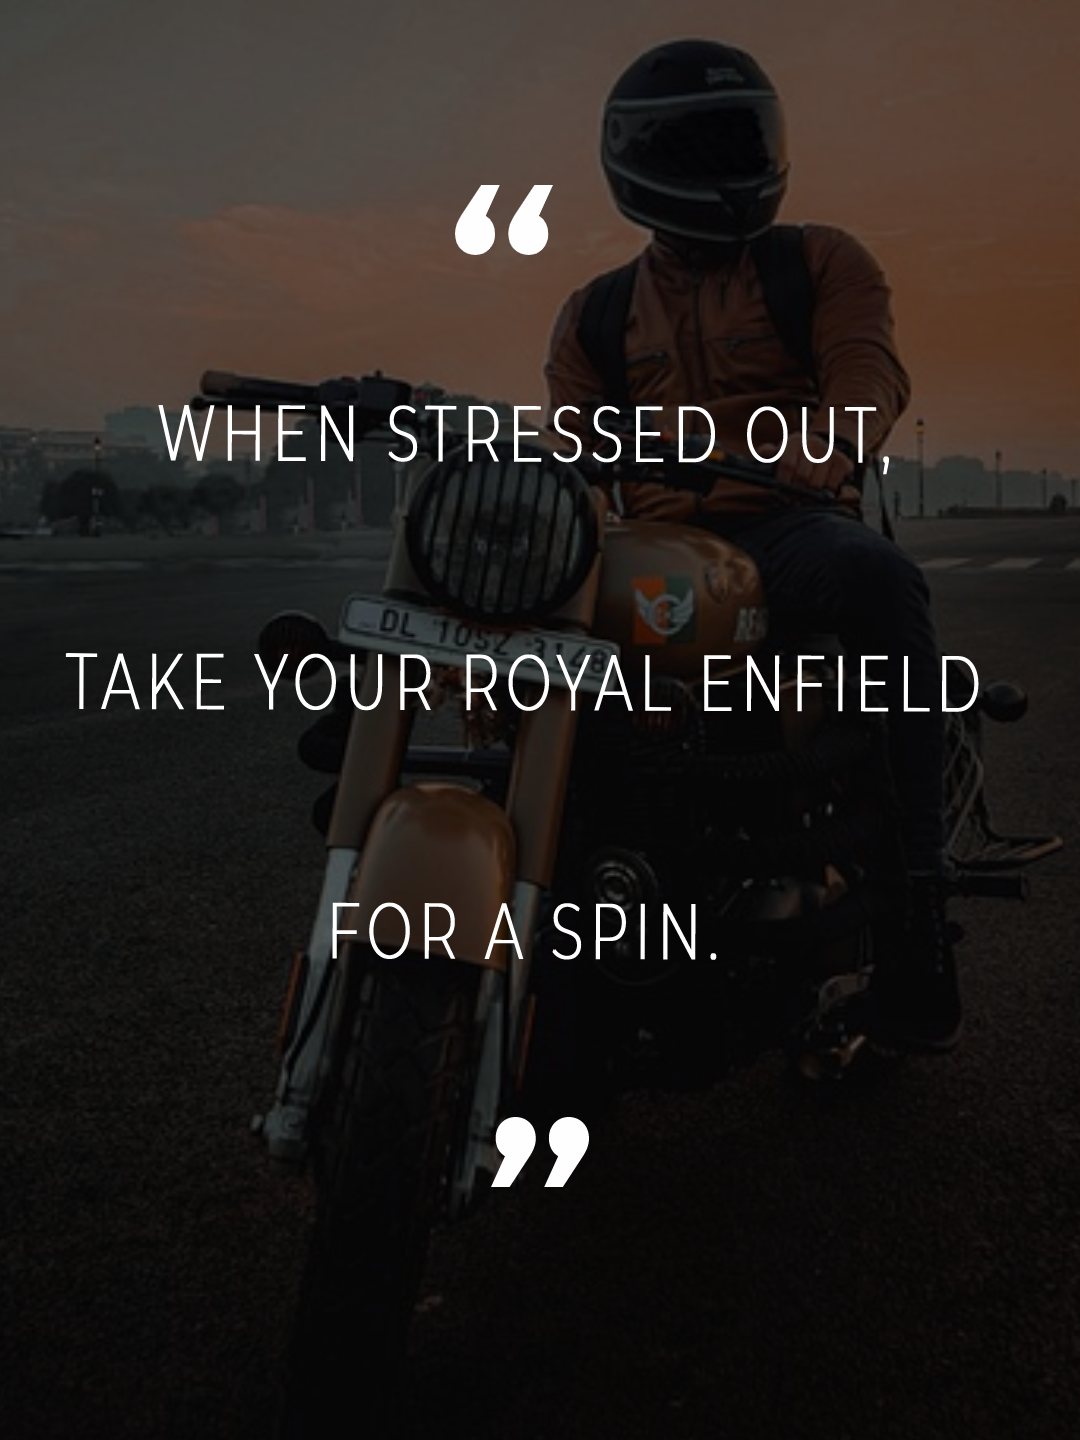 When stressed out, take your Royal Enfield for a spin. - Royal Enfield Status